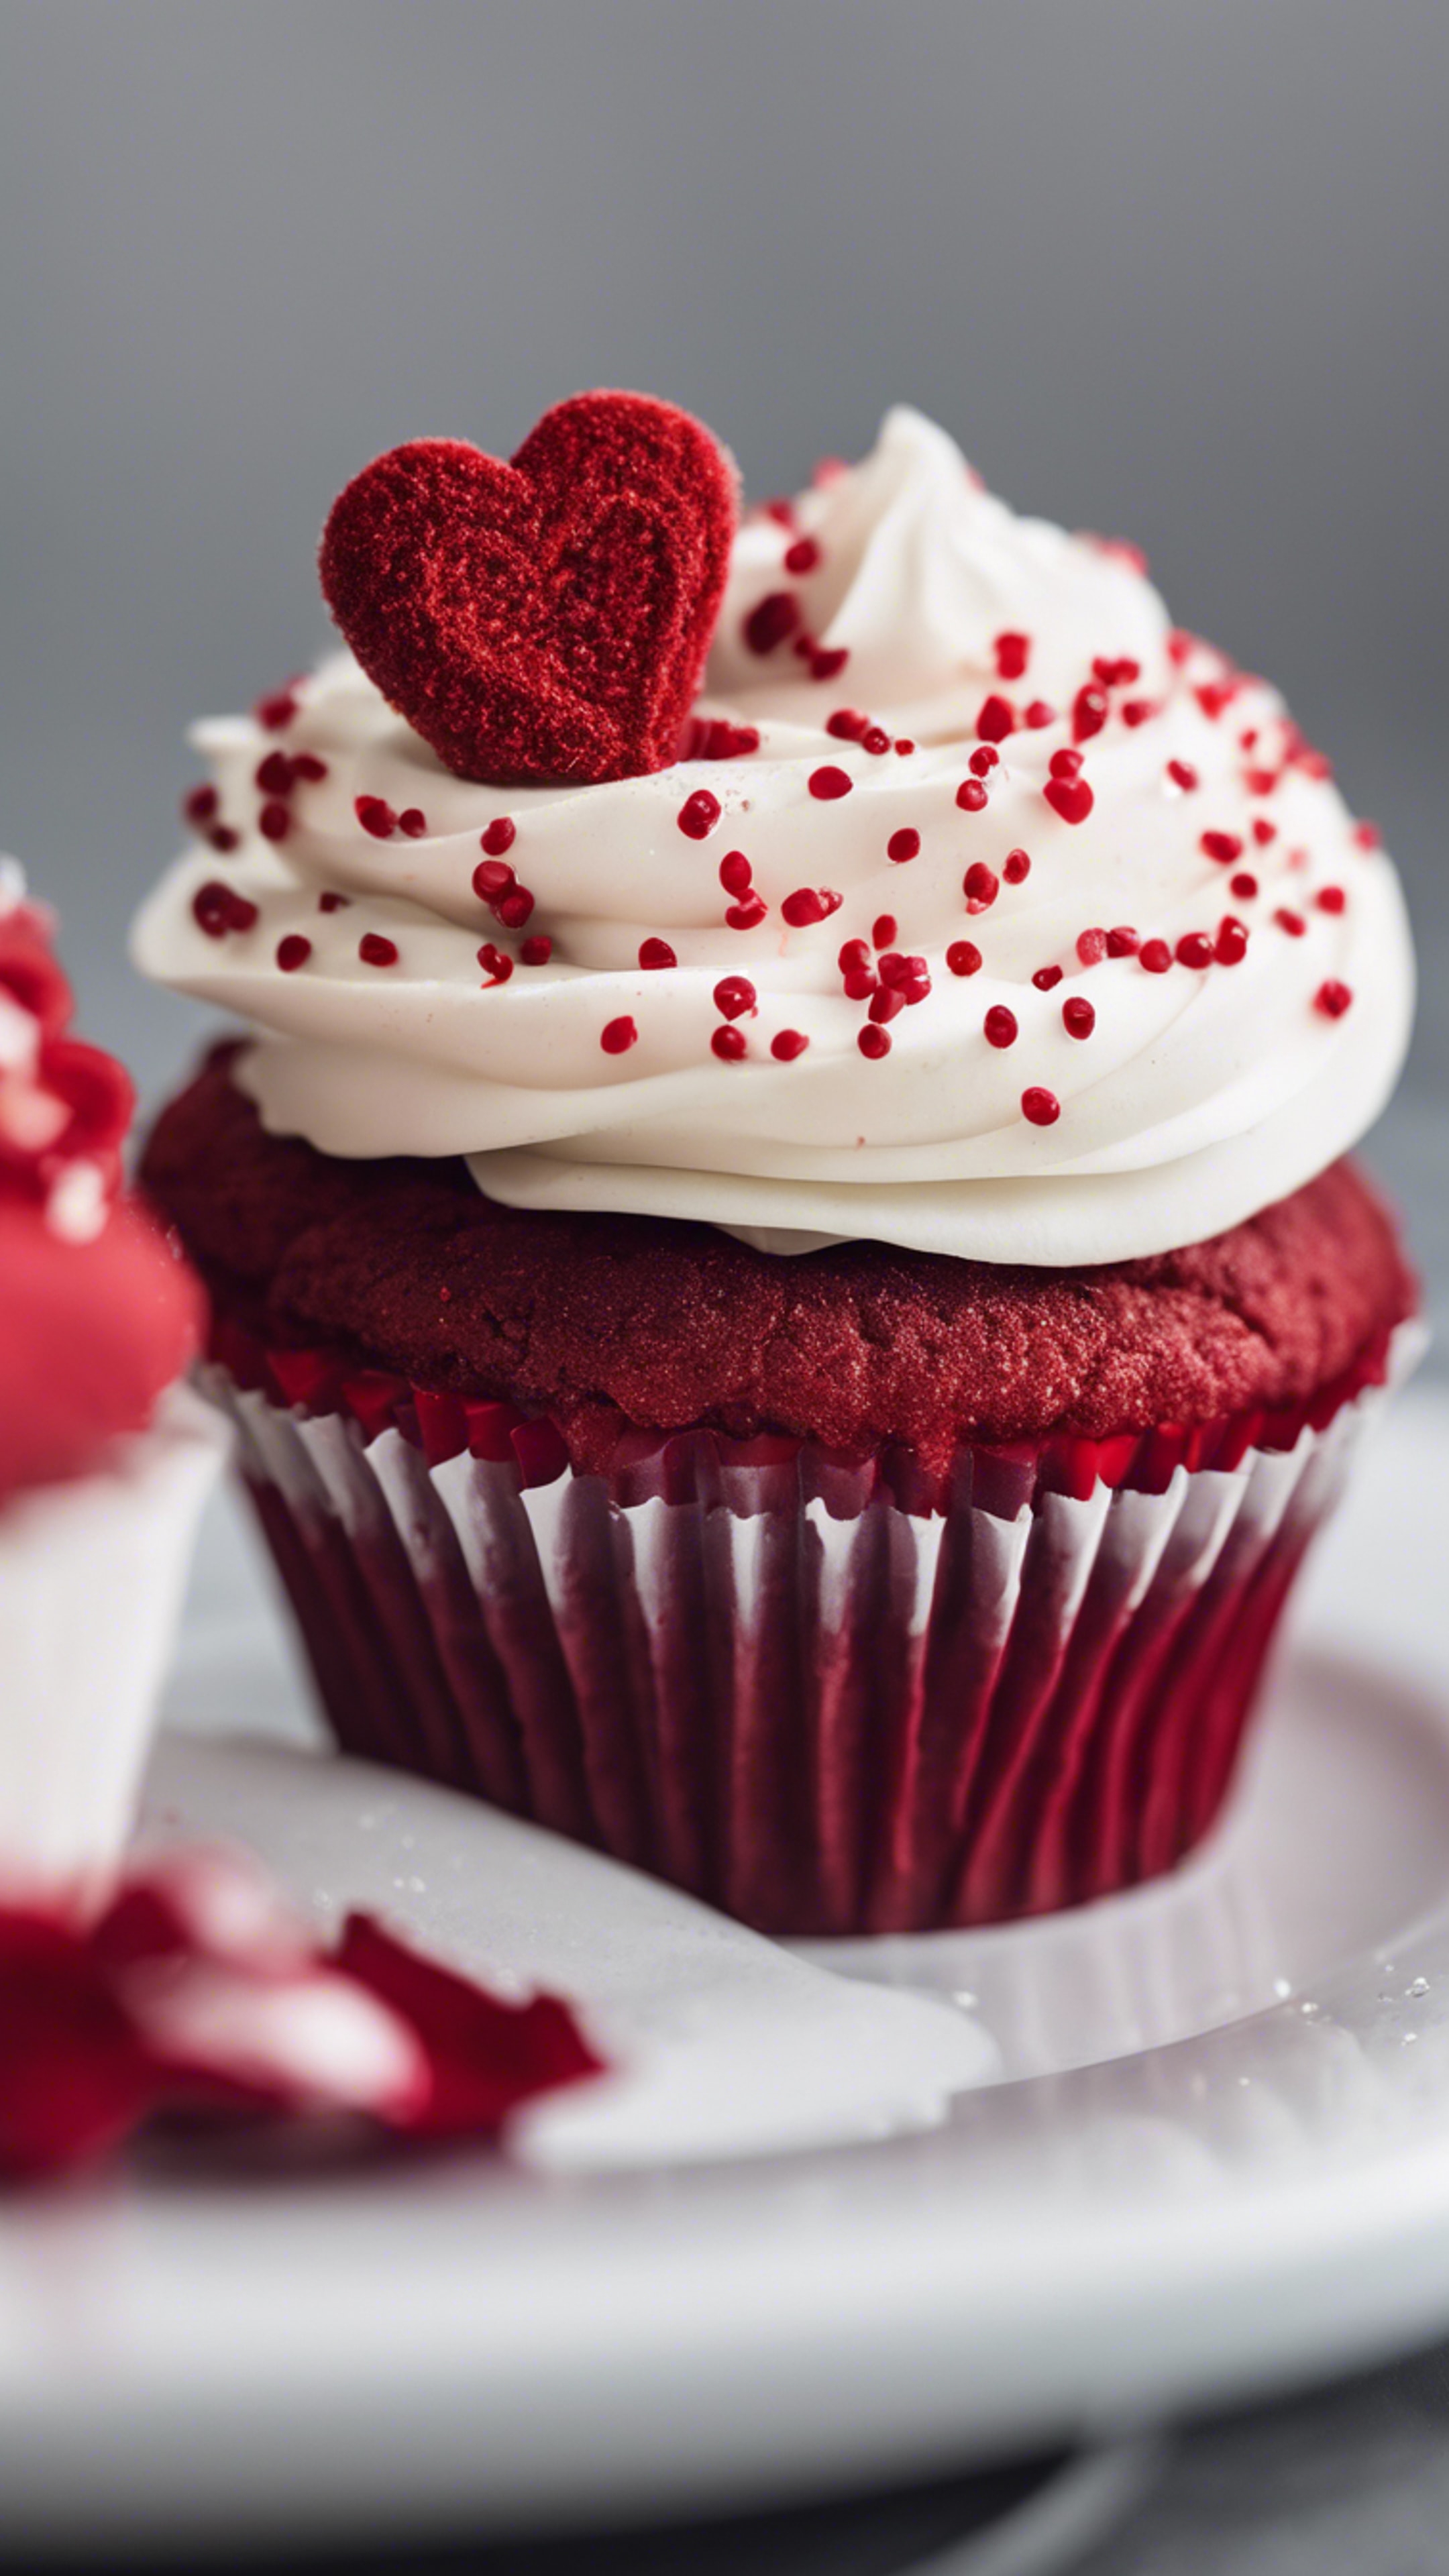 A red velvet cupcake with a heart-shaped sprinkle on top, presented on a white ceramic plate. Tapet[2d98083c137b4c3e8f81]